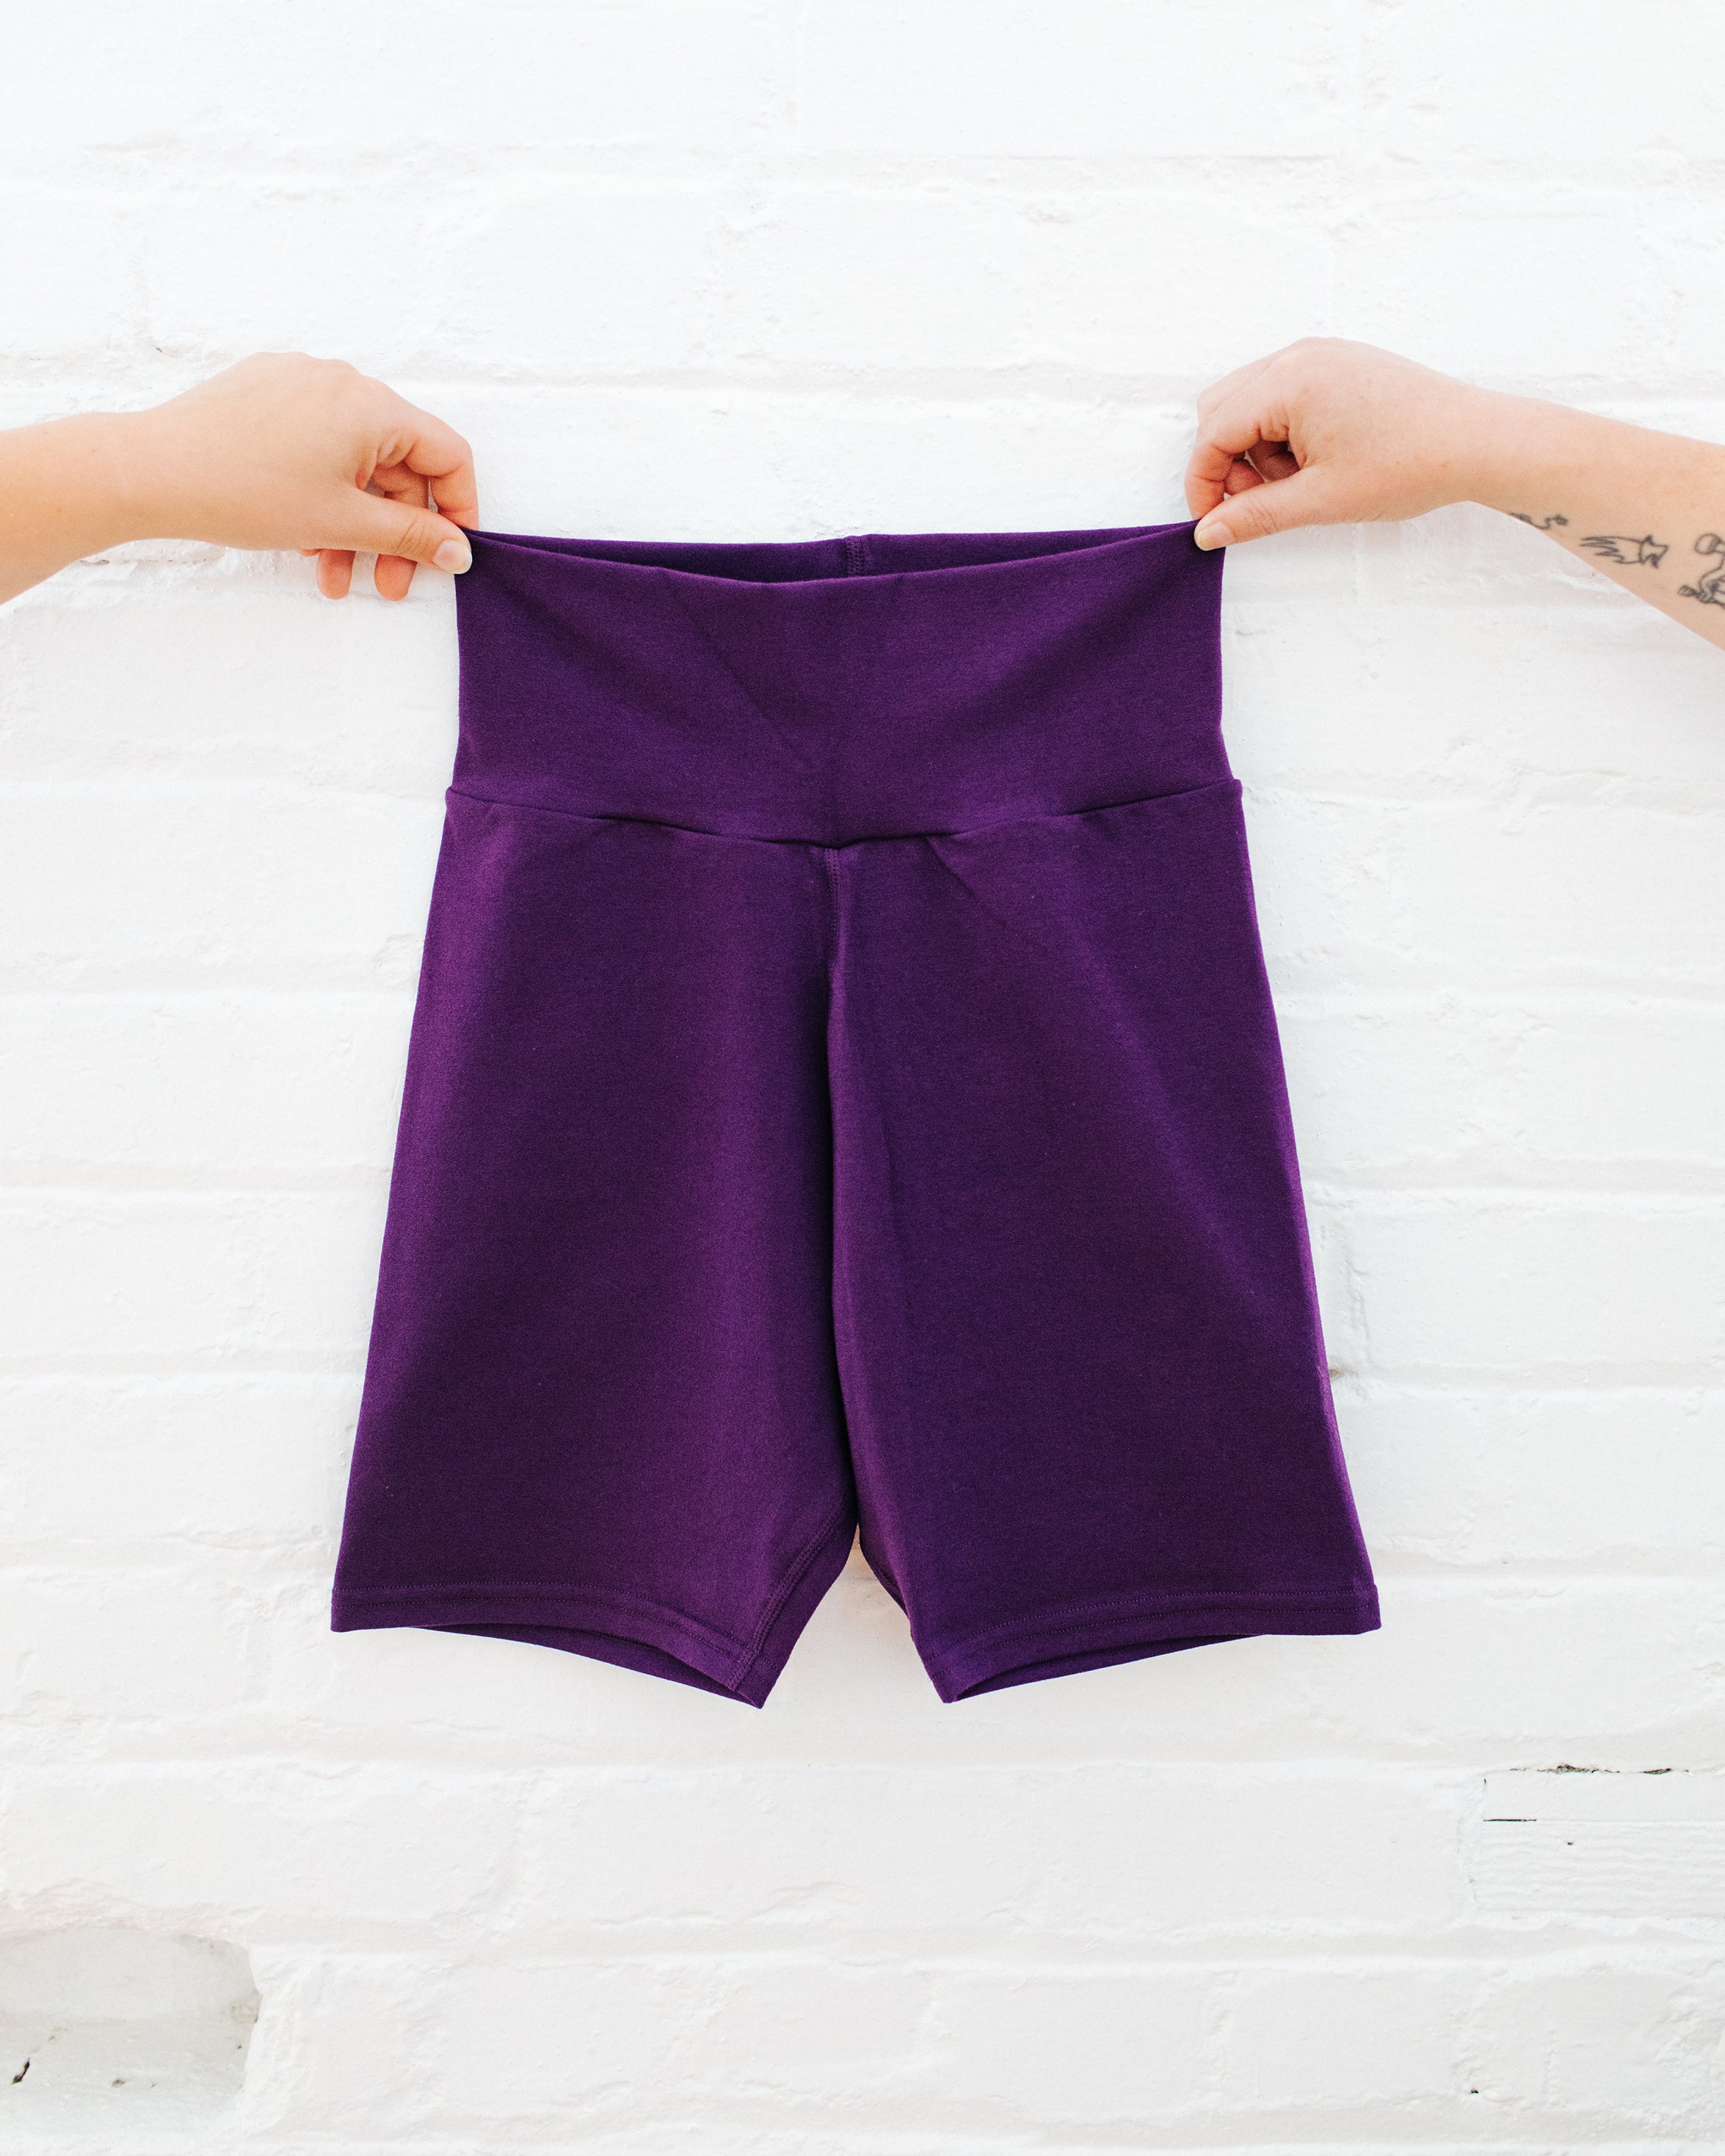 Purple Deep Amethyst Bike Shorts being held up against a white brick background.